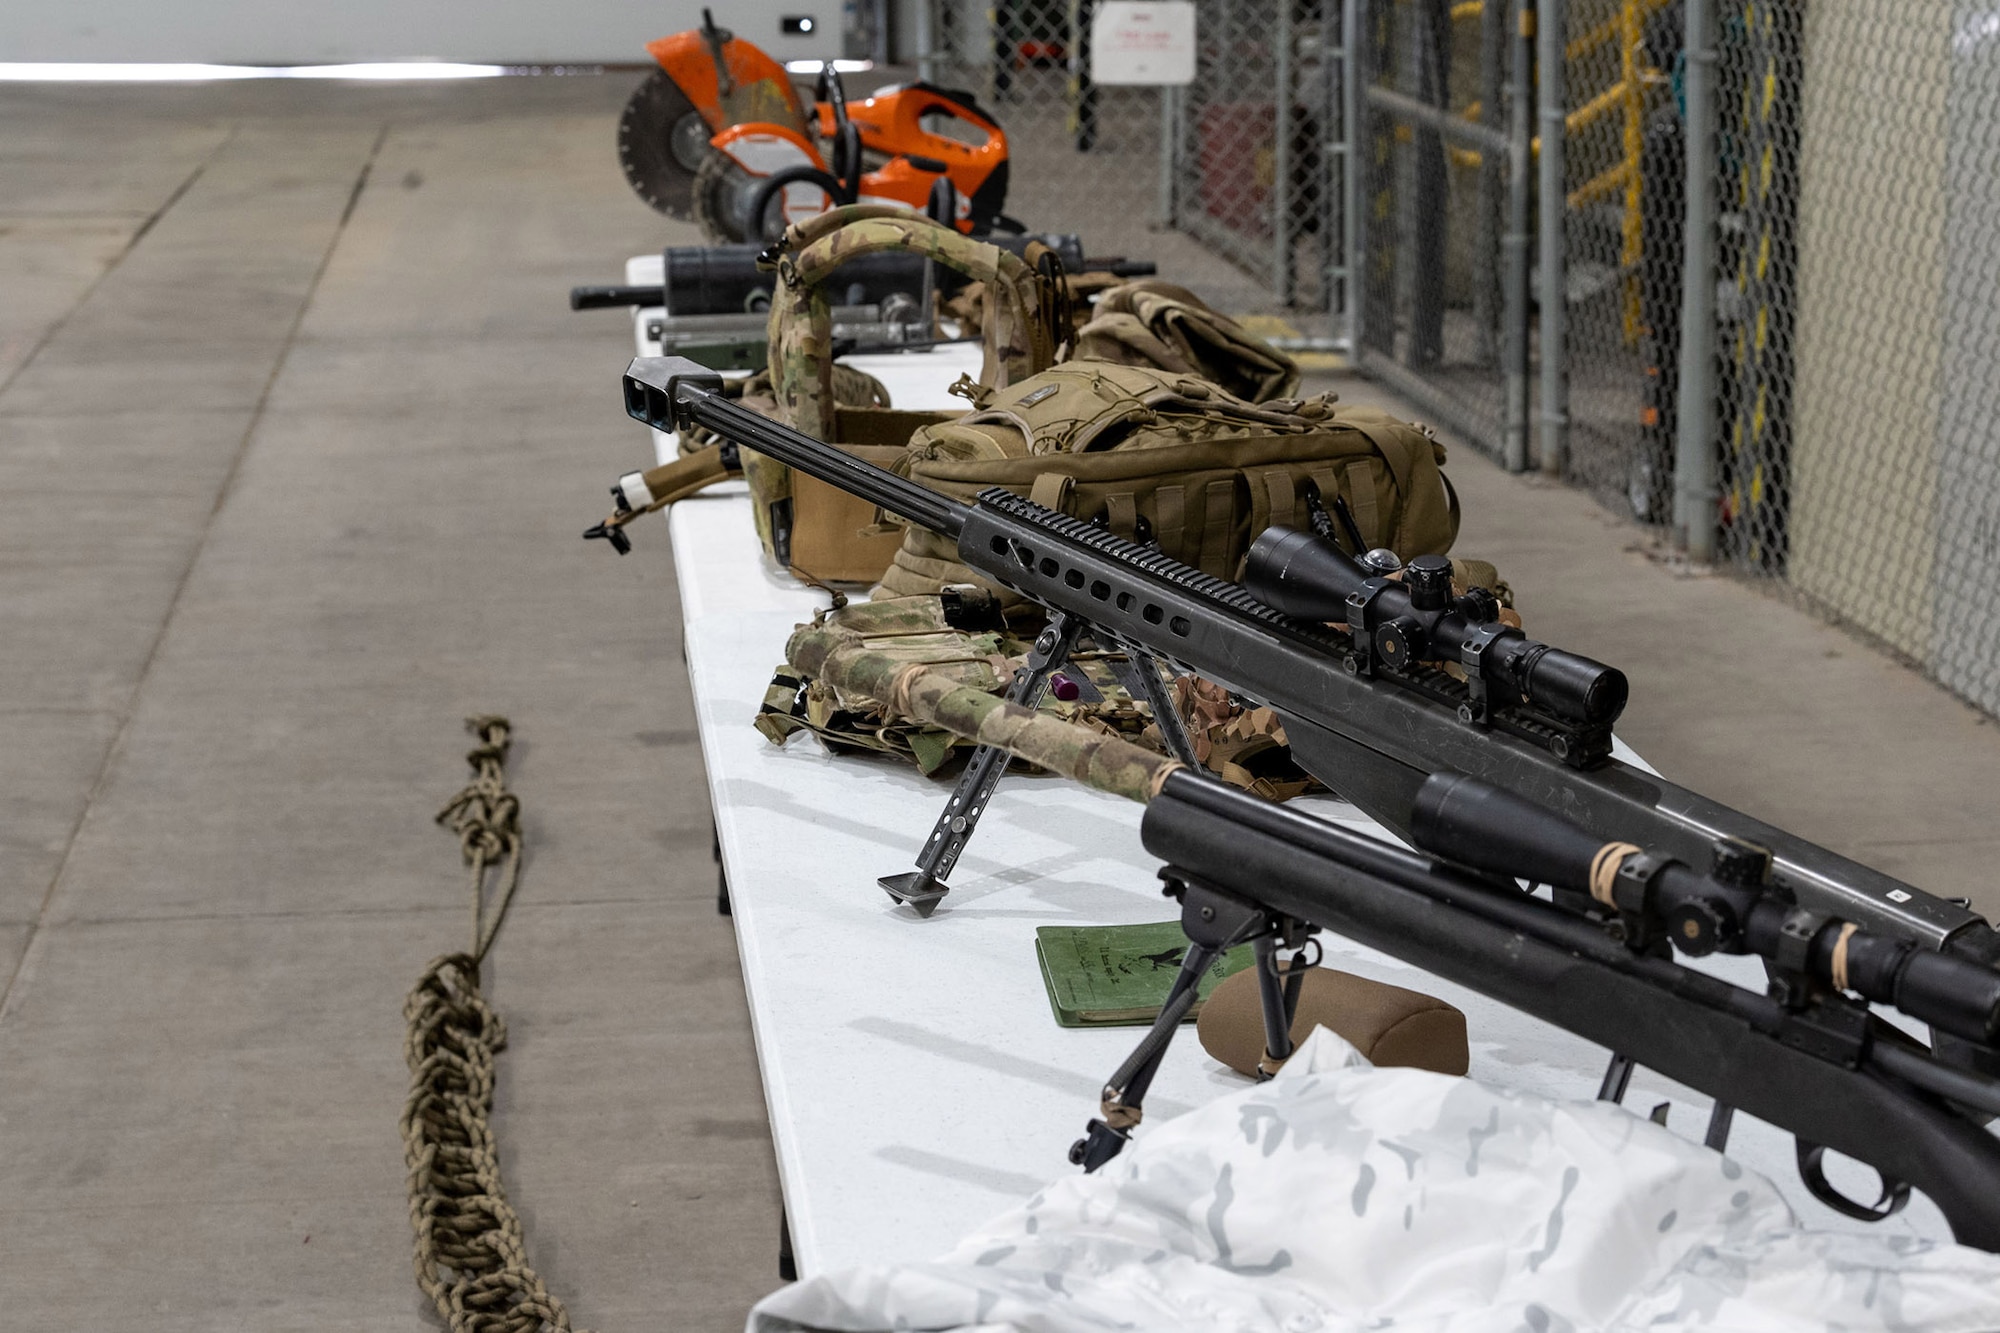 Pictured is equipment featured by the 341st Missile Security Operation Squadron tactical response force at a joint-training event March 8, 2022, at the emergency management warehouse on Malmstrom Air Force Base, Mont. The 341st Civil Engineer Squadron EM unit invited the FBI to better familiarize and integrate themselves with weapons and tactics used by base personnel during emergency response events, ultimately increasing safety. (U.S. Air Force photo by Airman Elijah Van Zandt)